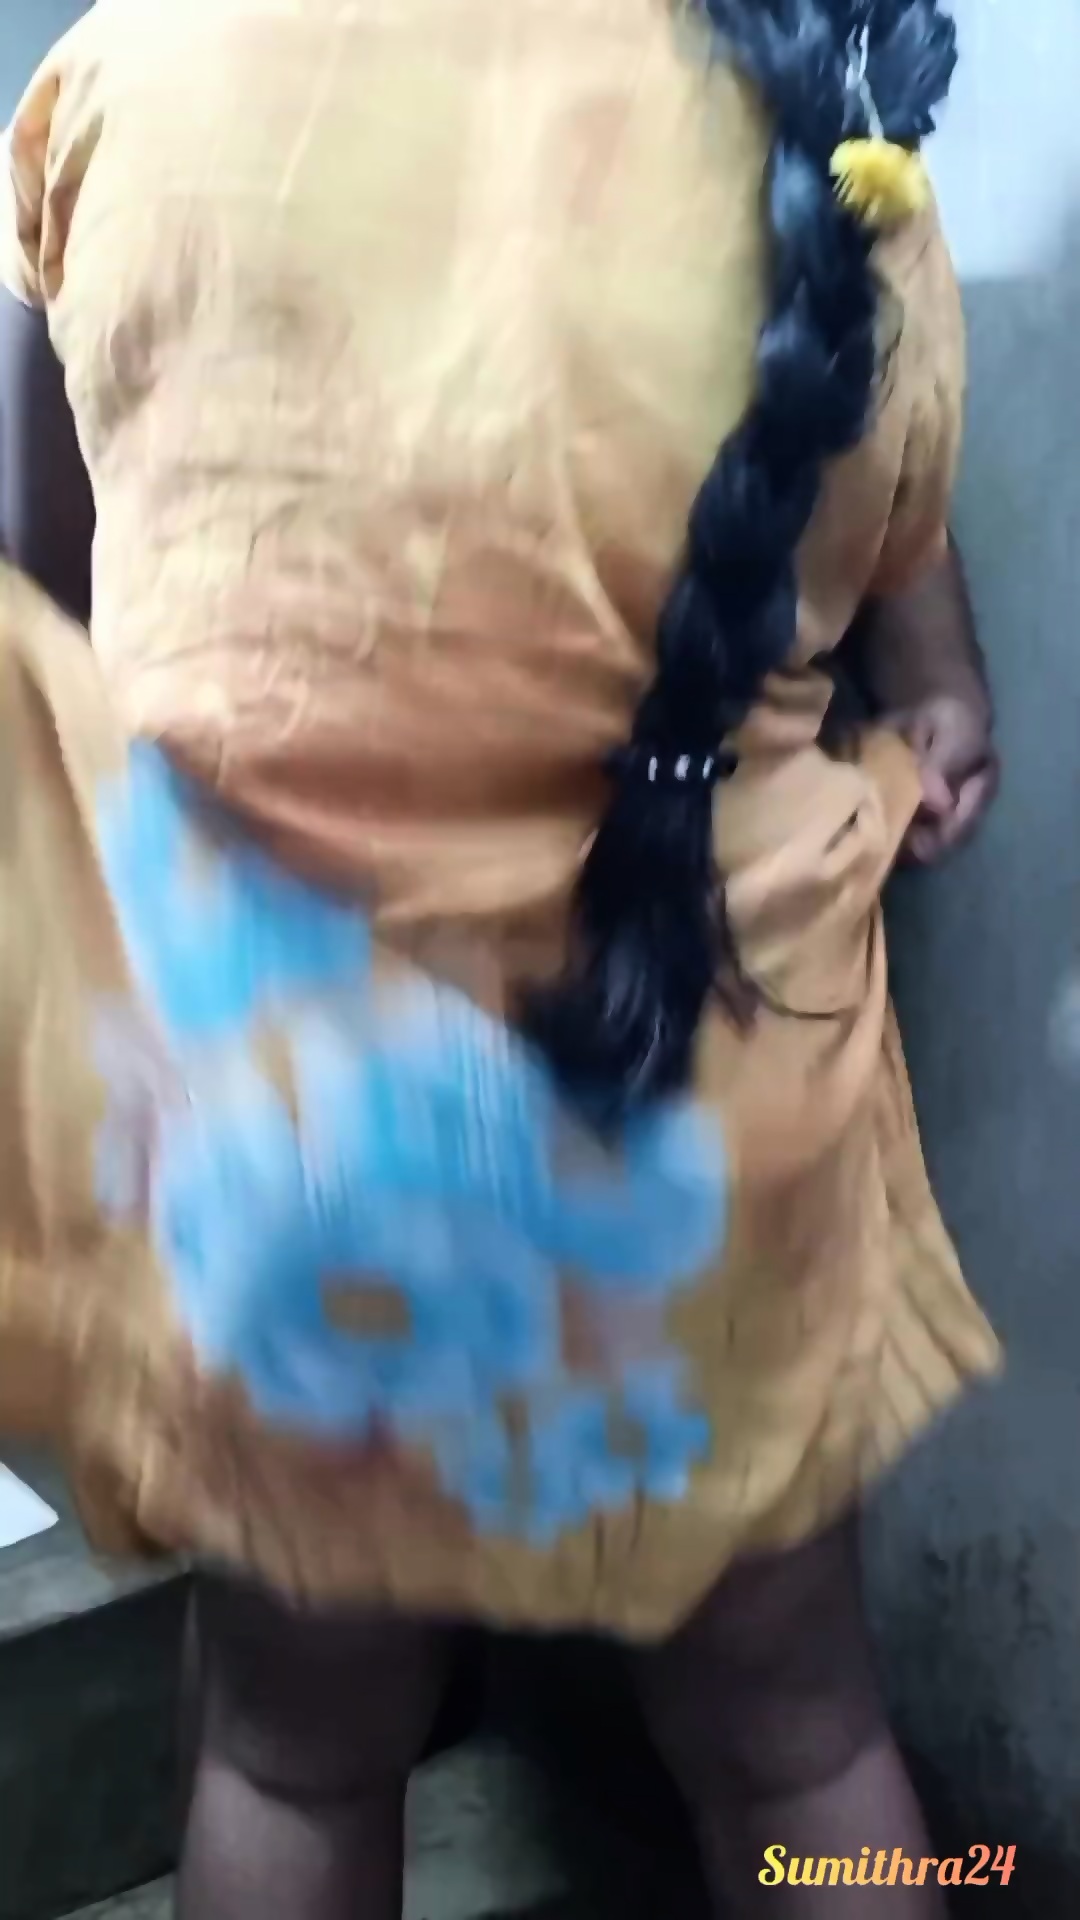 TAMIL Village Couple Standing Fuck Squirting Orgasm XhJ - EPORNER